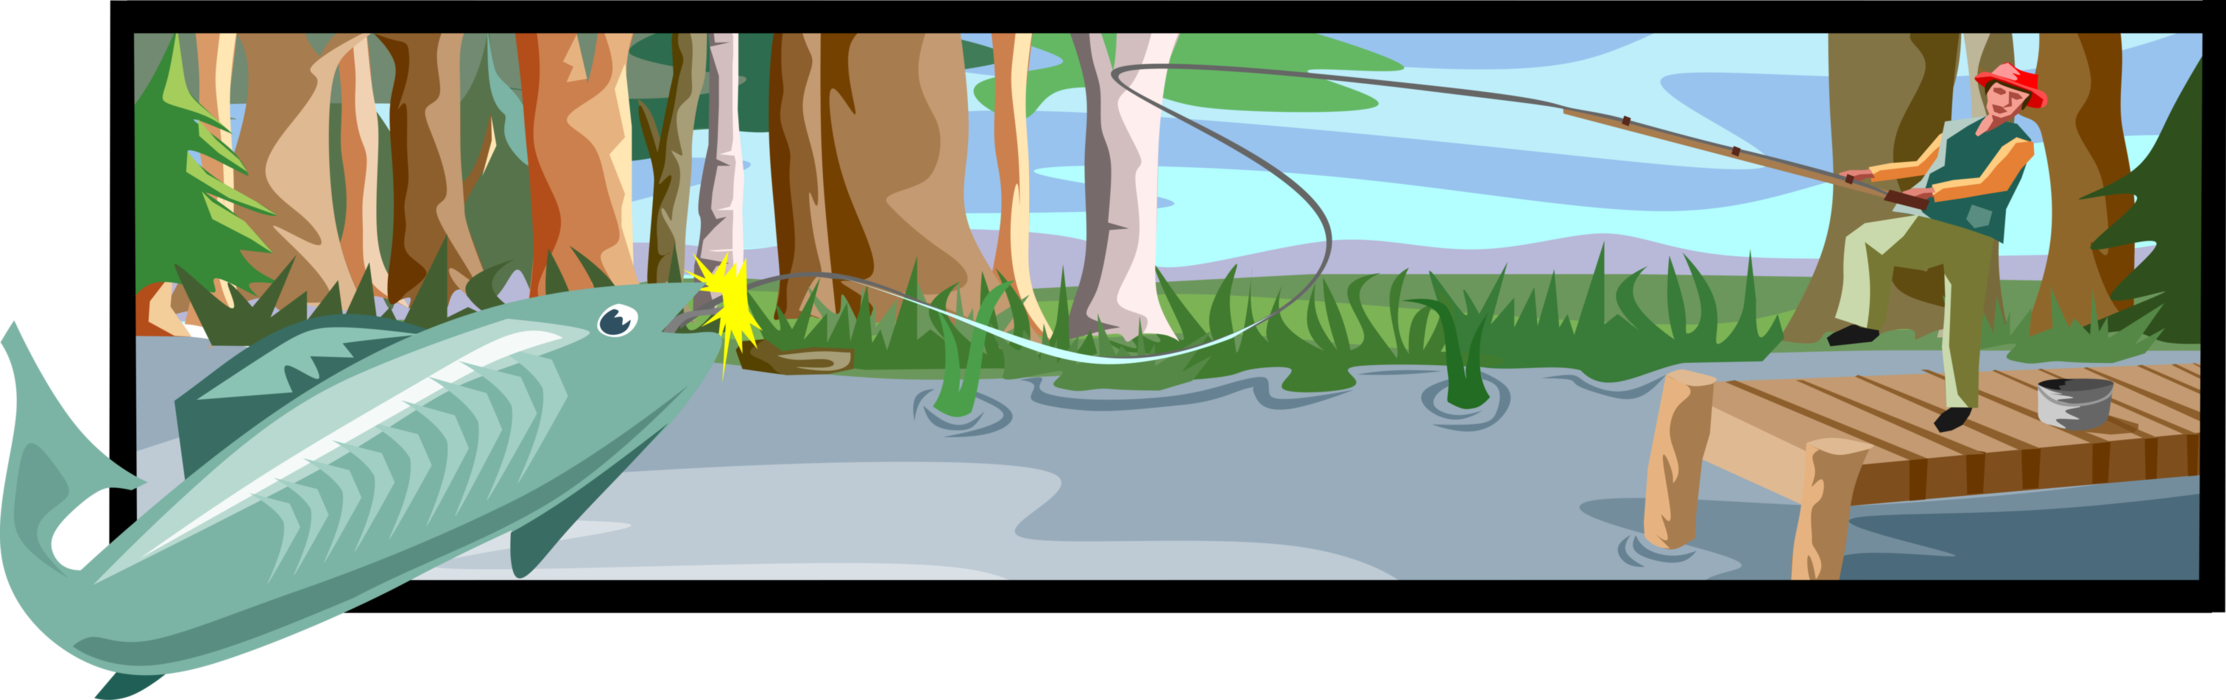 Vector Illustration of Sport Fisherman Angler Fishing From Dock on Lake Catches Fish